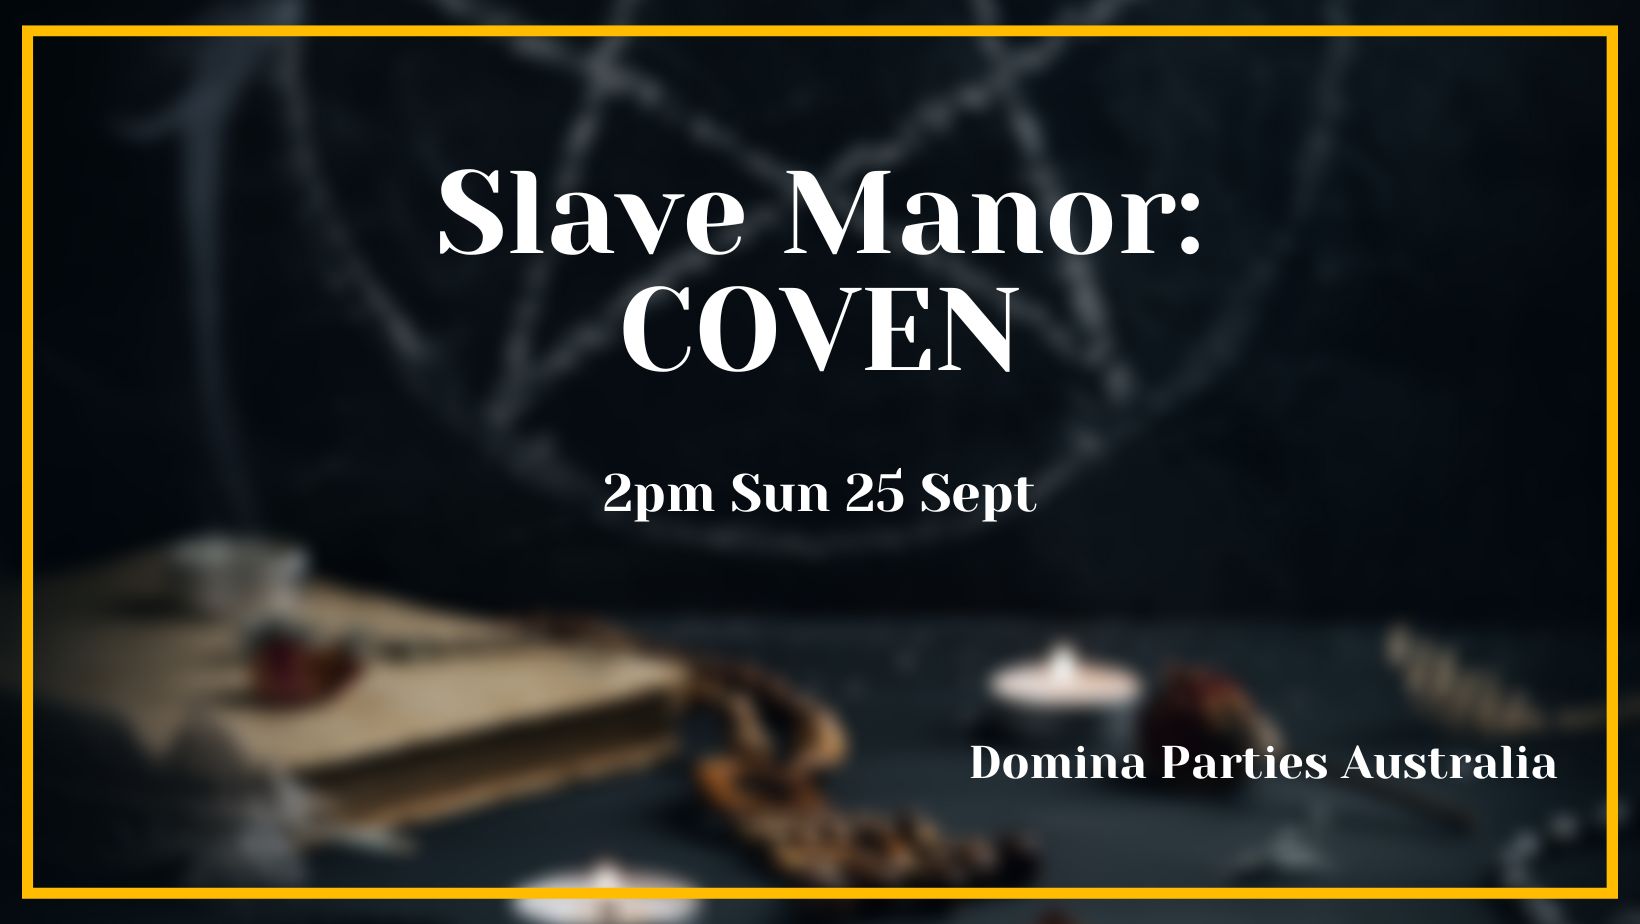 Slave Manor: COVEN Domina Parties Sydney 25 August